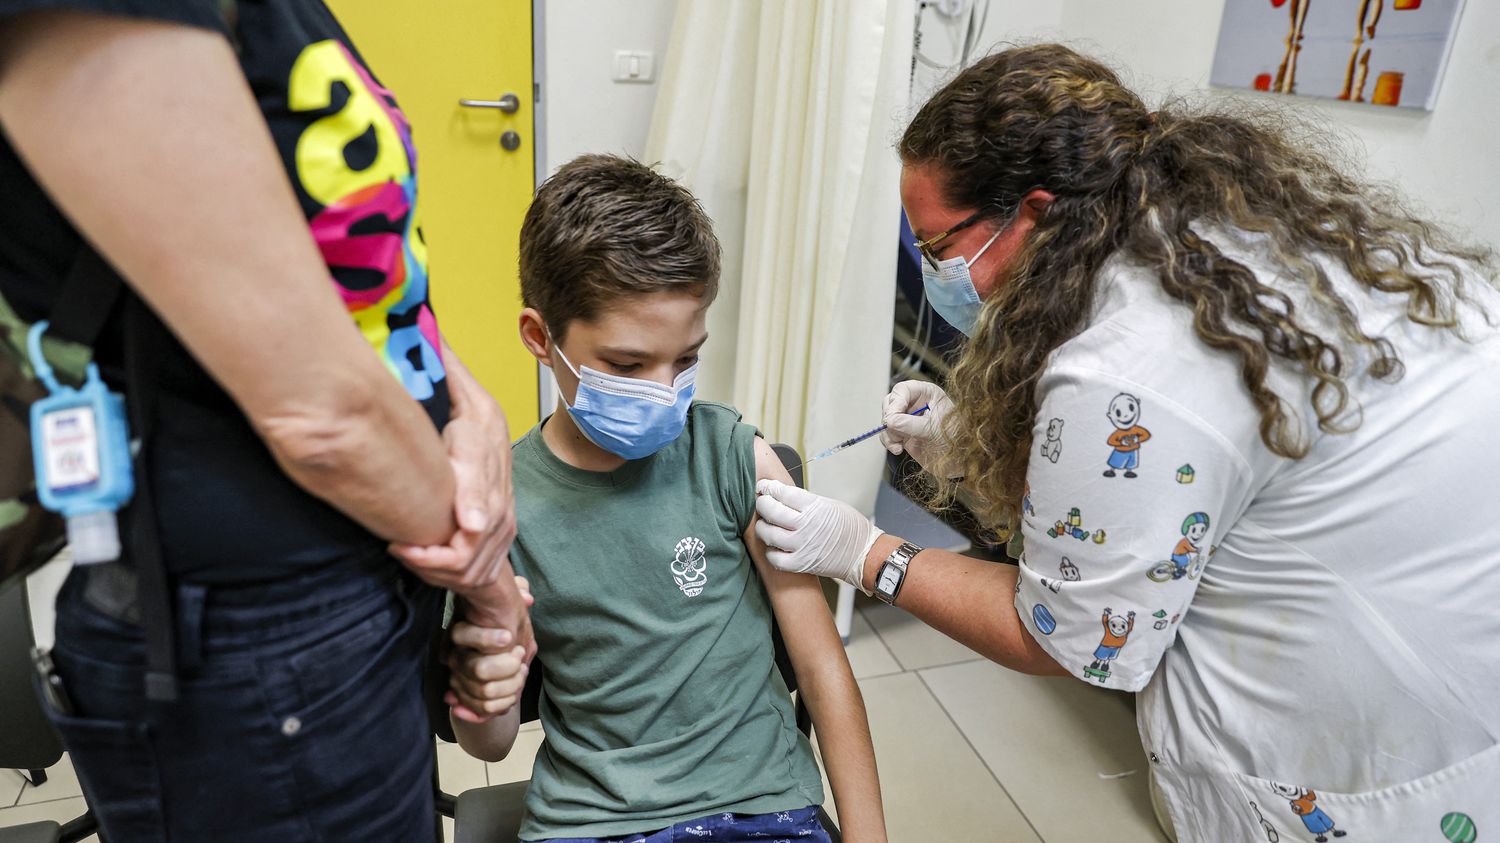 Israel has been providing the third dose of the vaccine since the age of twelve

